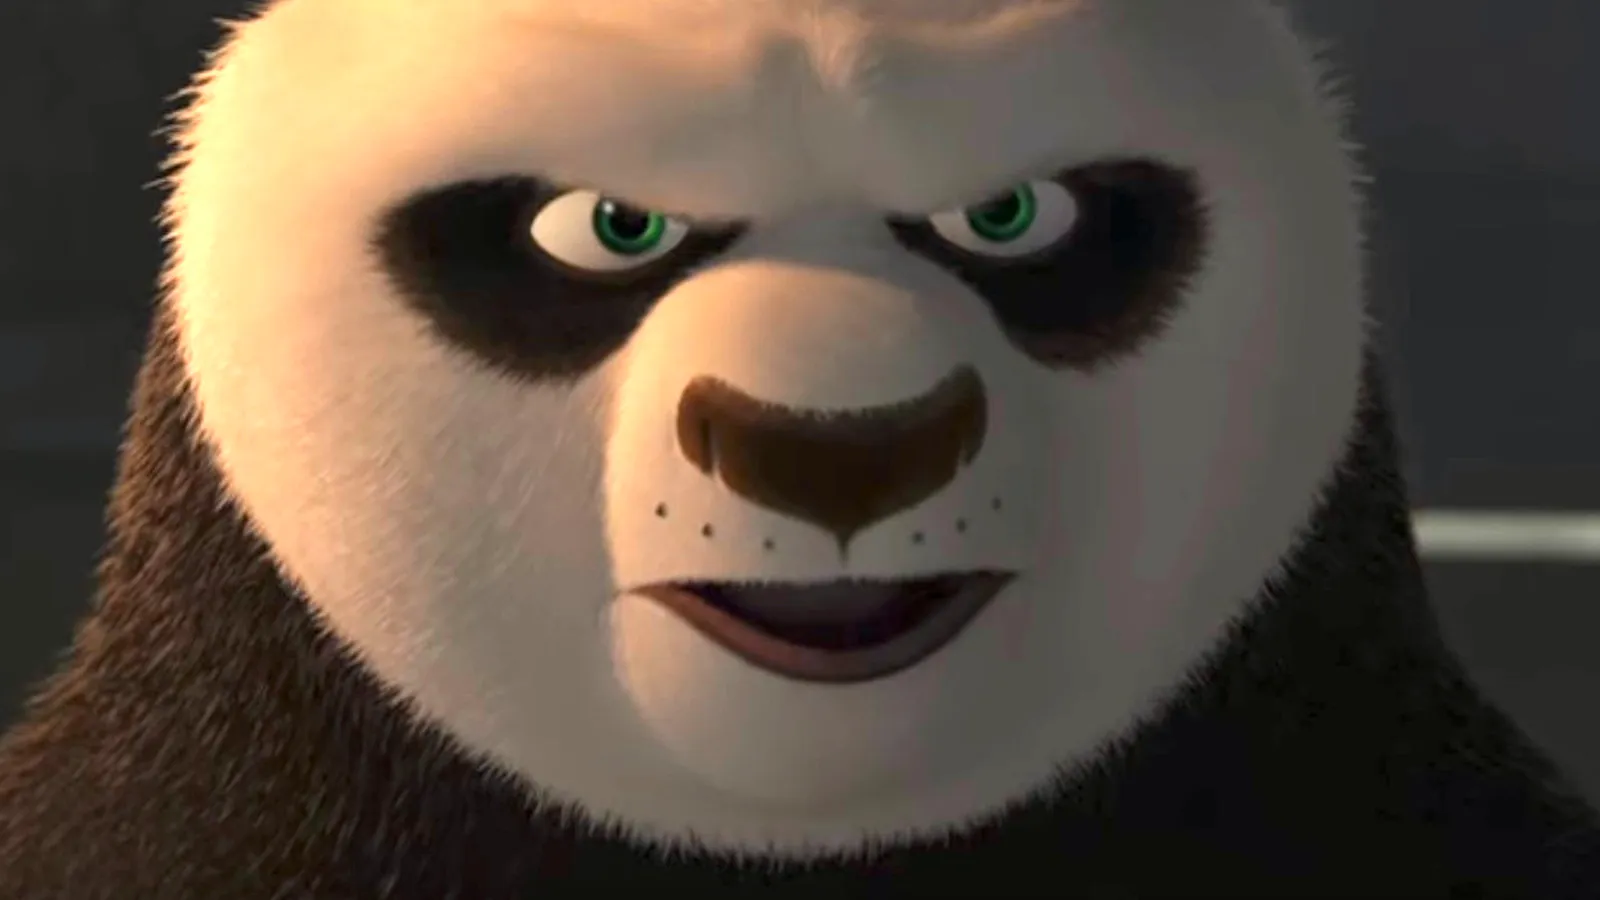 Po in Kung Fu Panda. This image is part of an article about the Kung Fu Panda 4 trailer introducing Awkwafina's Zhen.